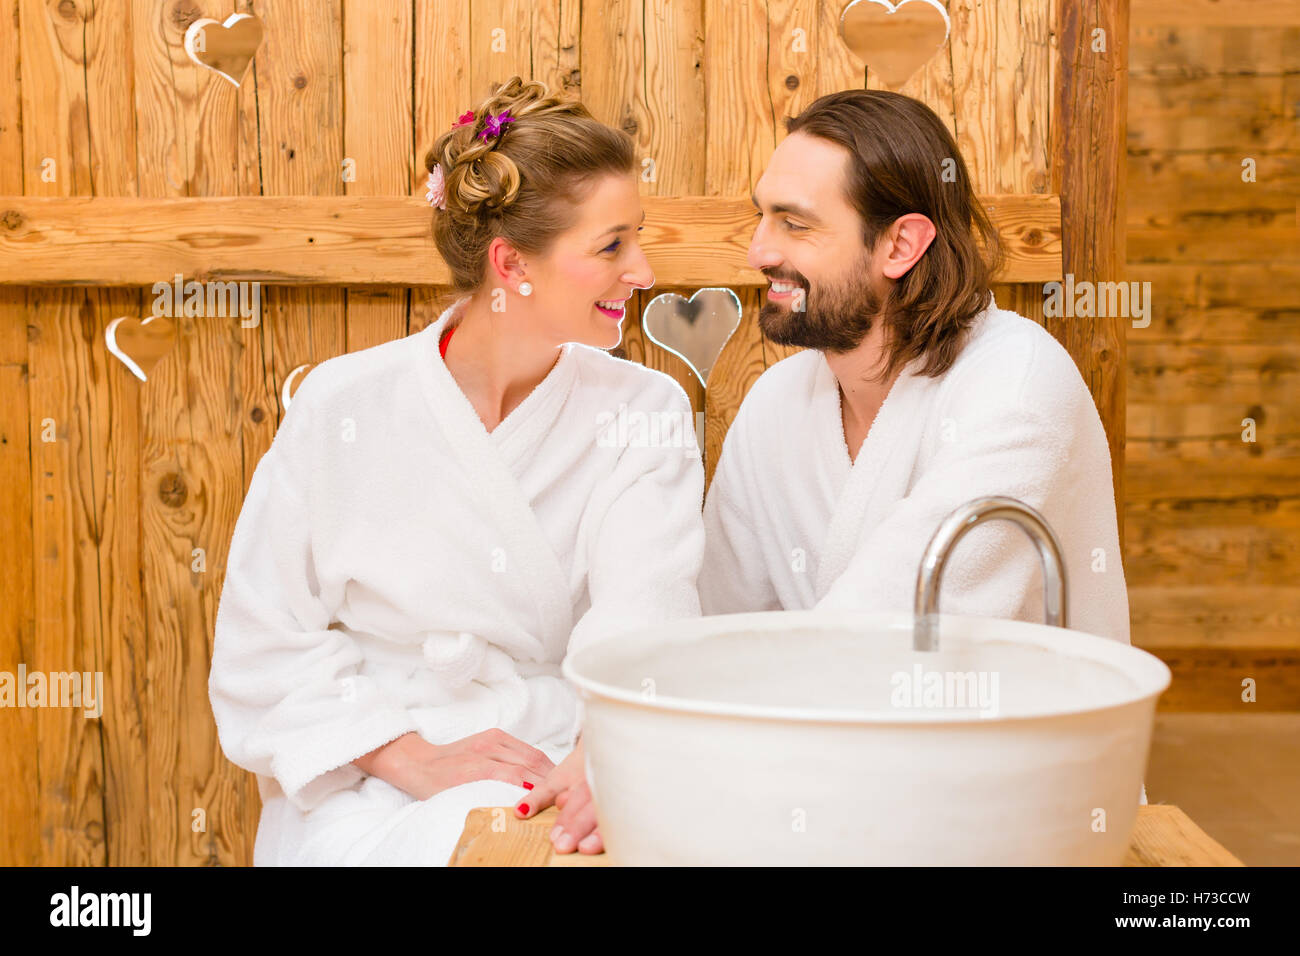 woman relaxation wood romantic european caucasian hotel outing bathrobe refreshing weekend wash basin valentines day luxury Stock Photo